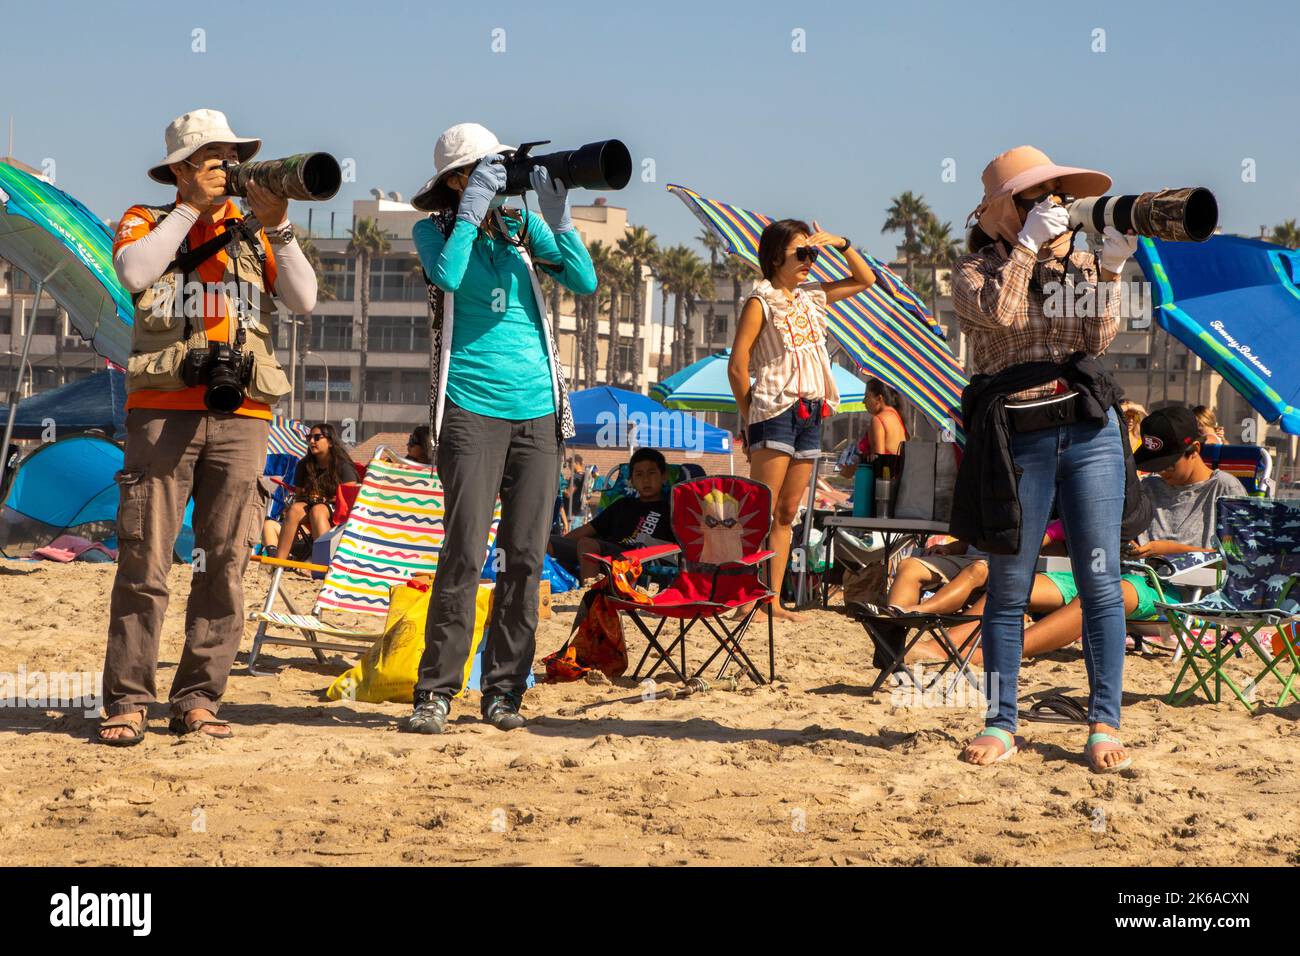 Male and female Asian American amateur photographers focus on a July Fourth air show in Huntington Beach, CA. Stock Photo